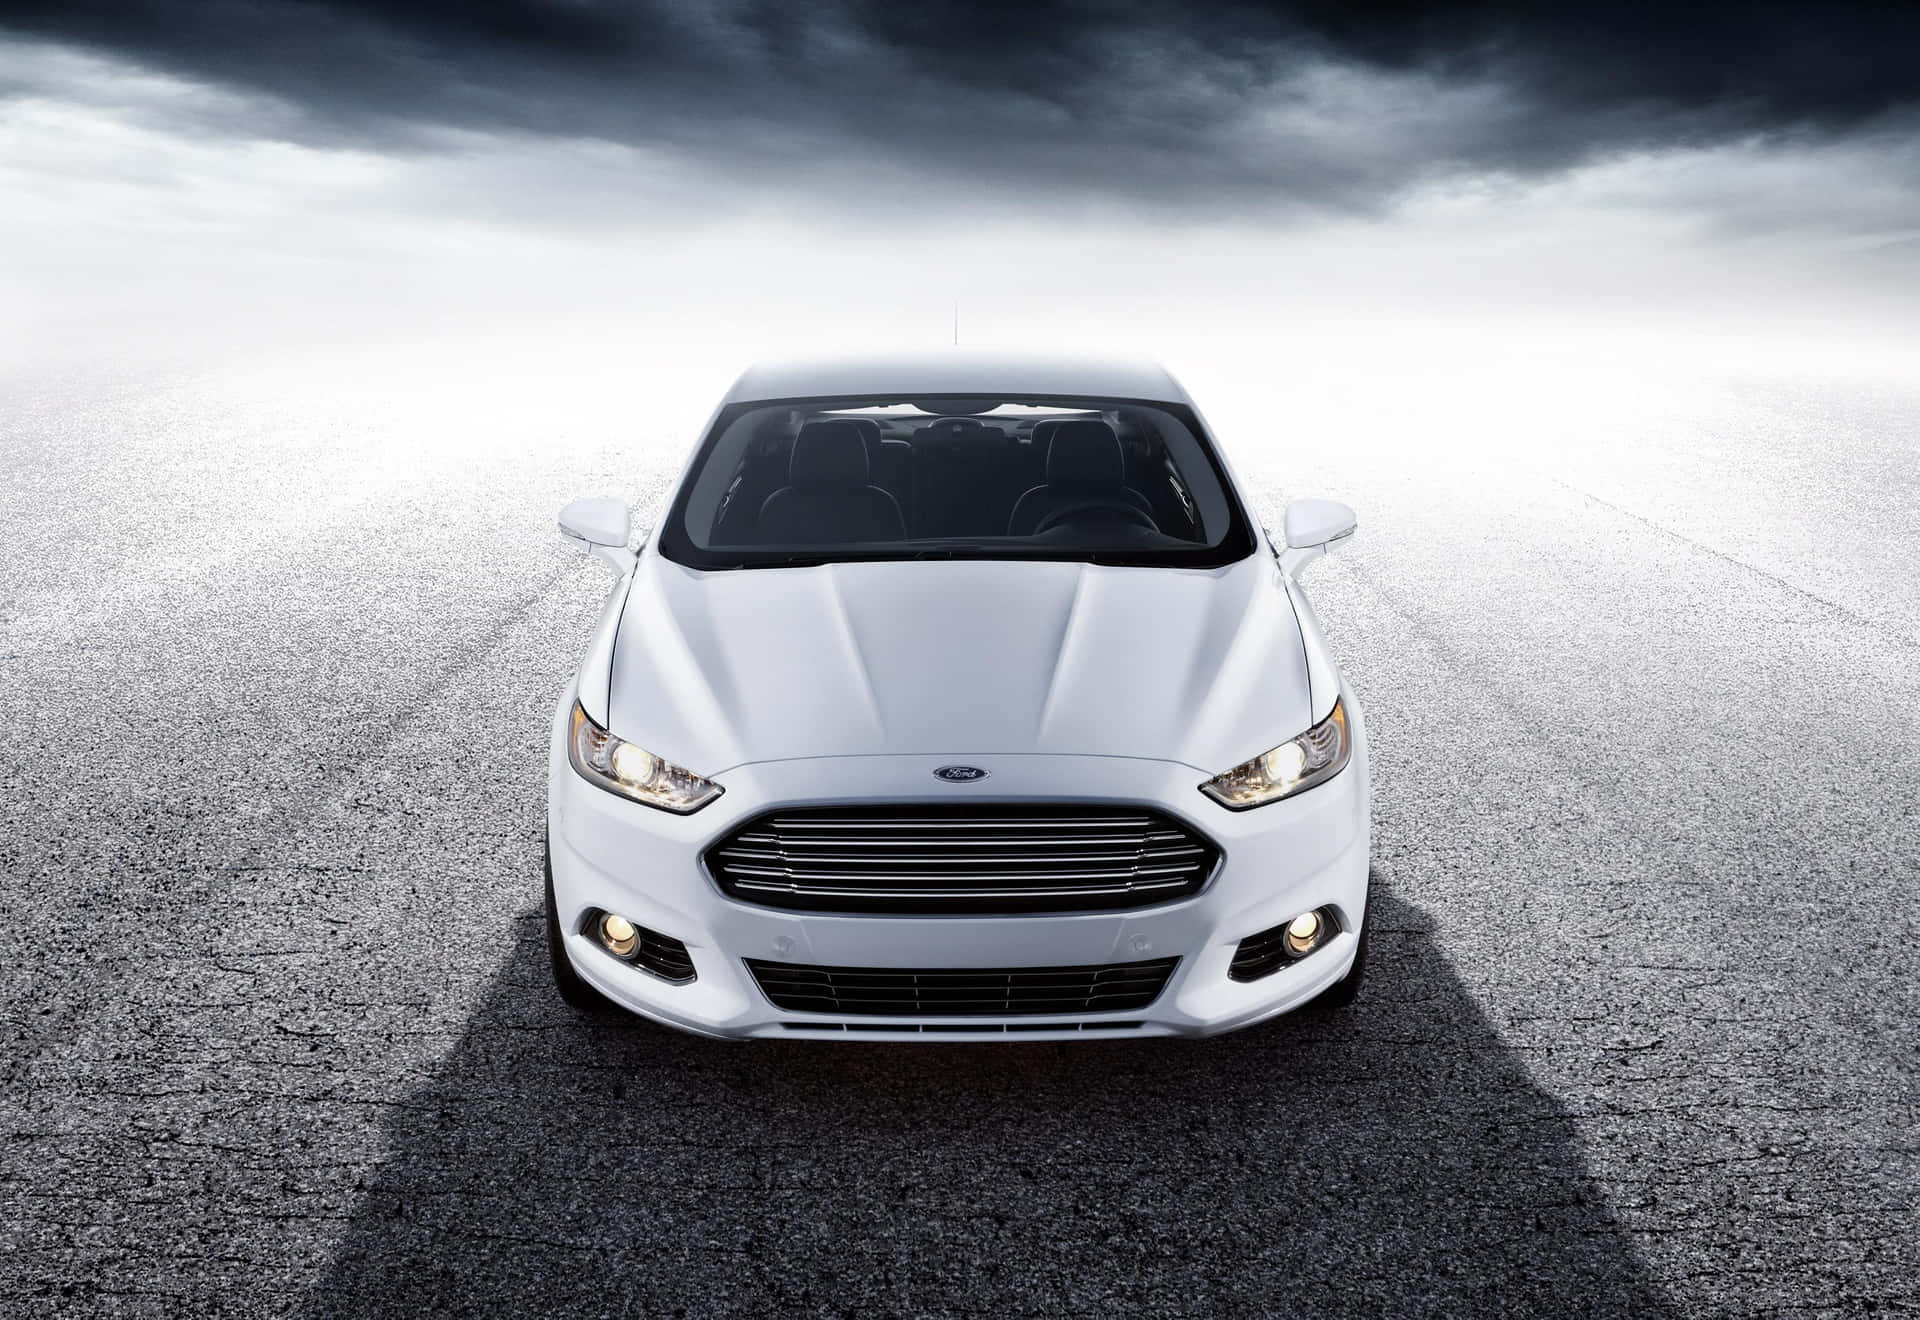 Caption: Sleek and Sophisticated Ford Fusion on the Road Wallpaper